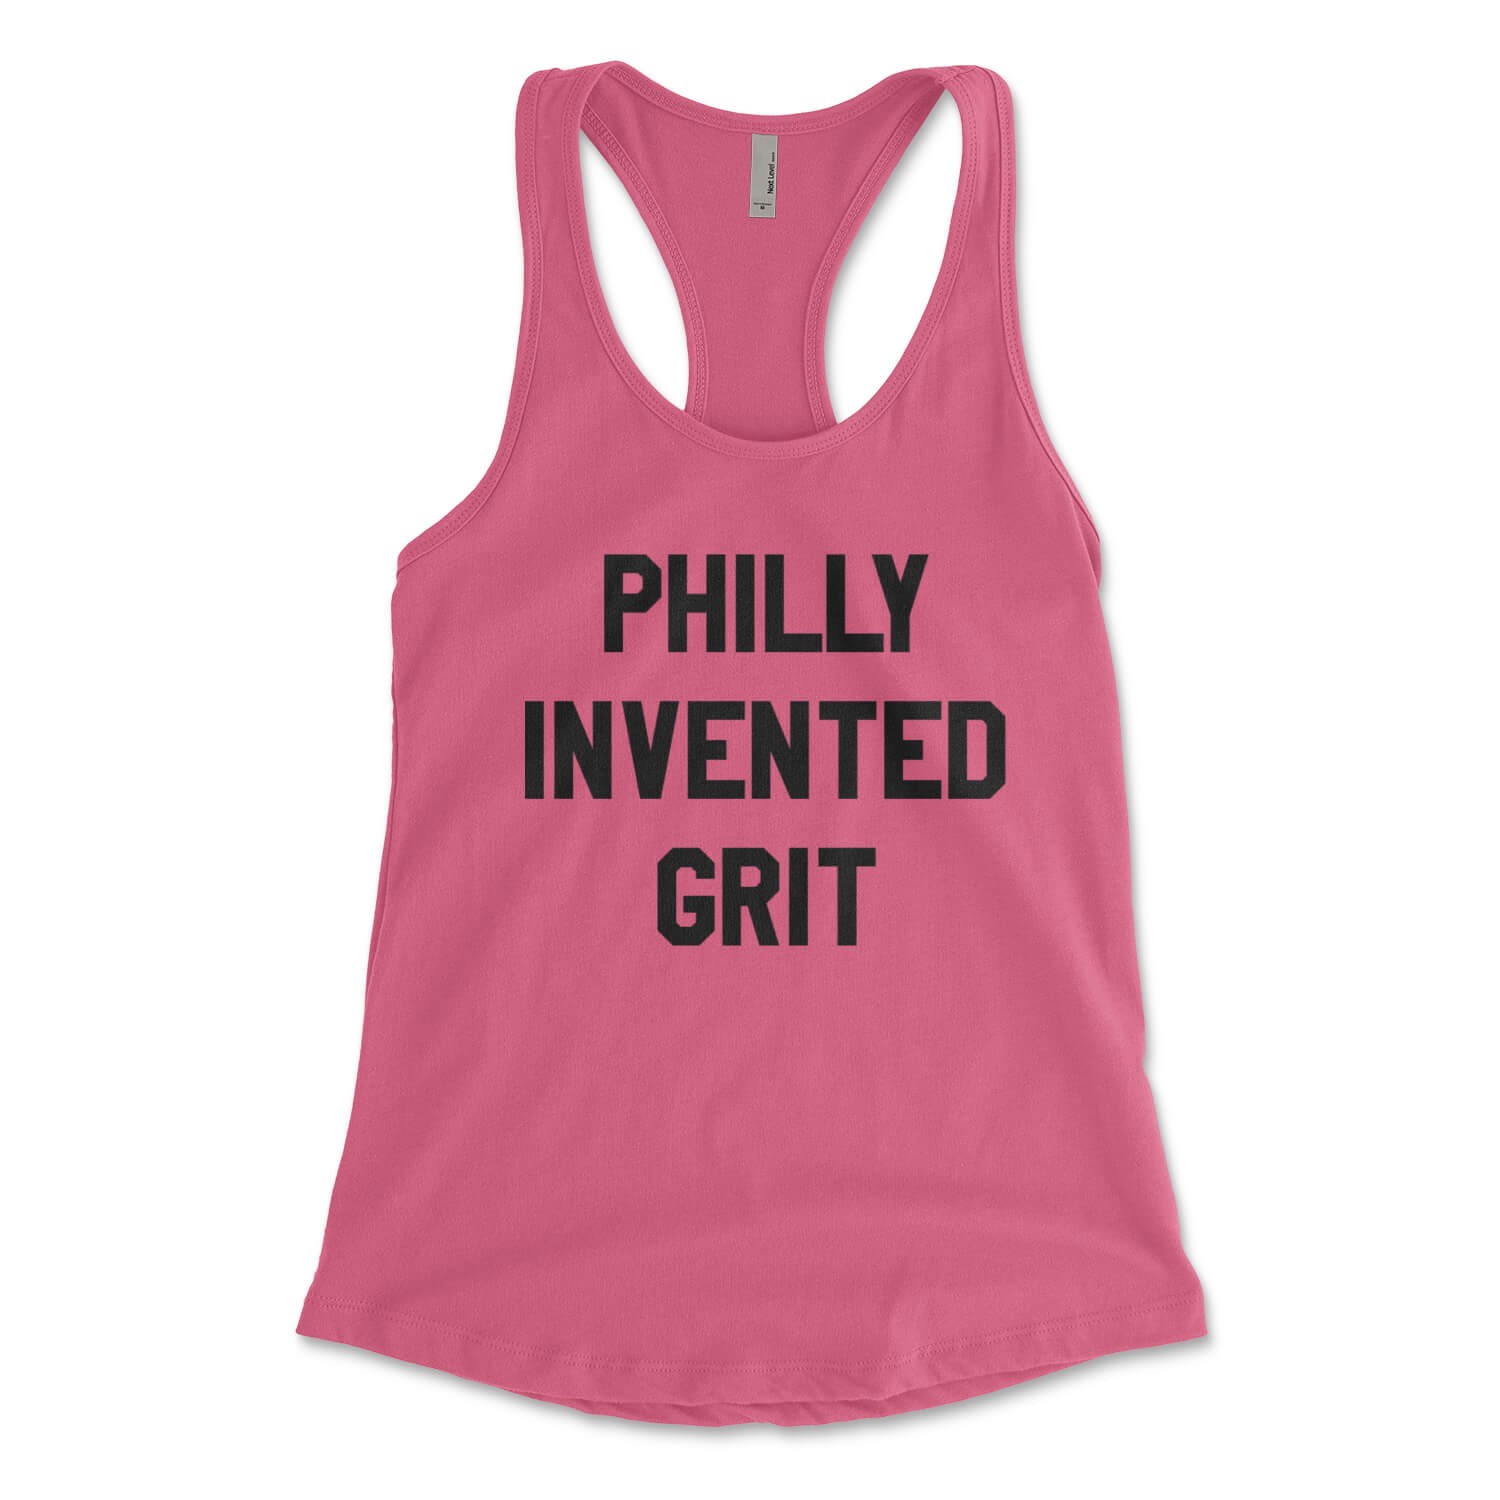 Philly invented grit hot pink womens racerback tank top from Phillygoat